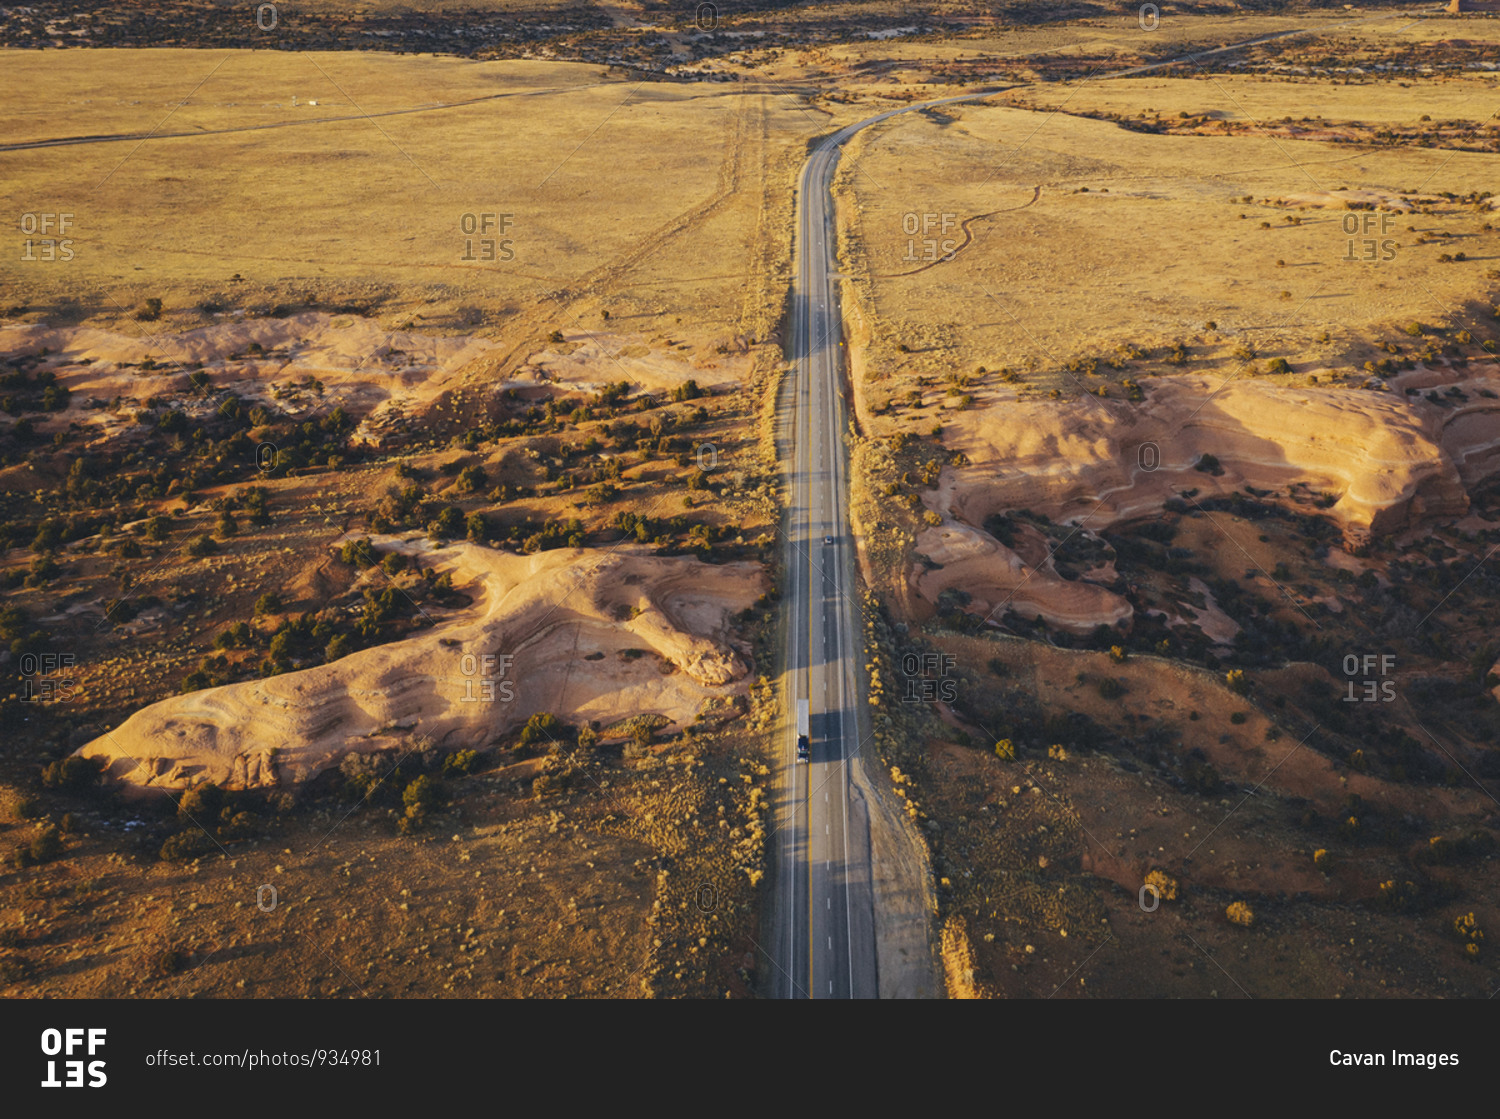 Lonely Utah\'s road in the evening with a truck from above